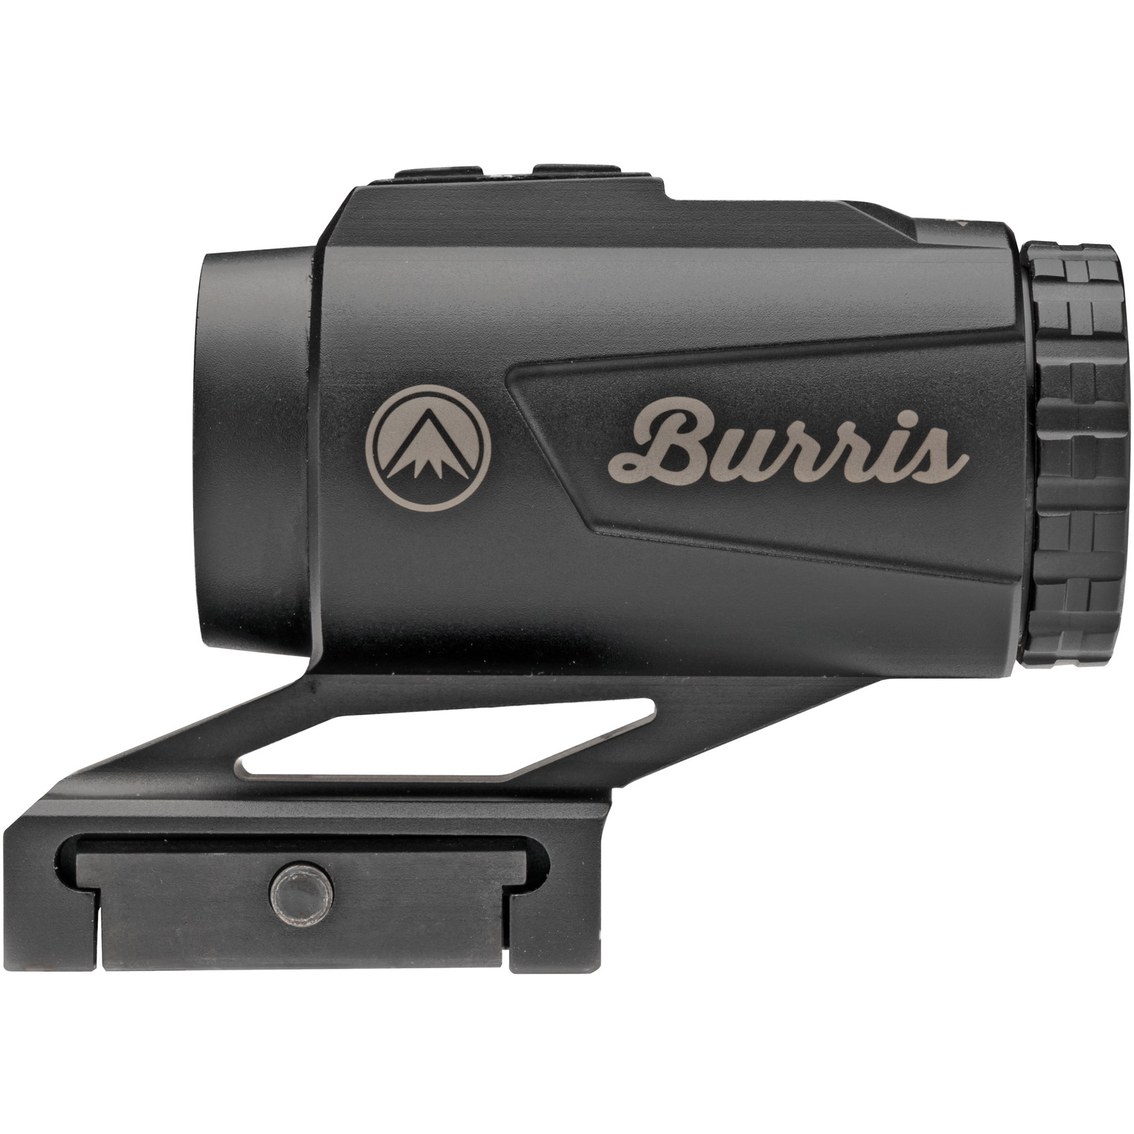 Burris RT-3 3X30mm Ballistic 3X Reticle Magnified Red Dot Sight with Mount Black - Image 2 of 2